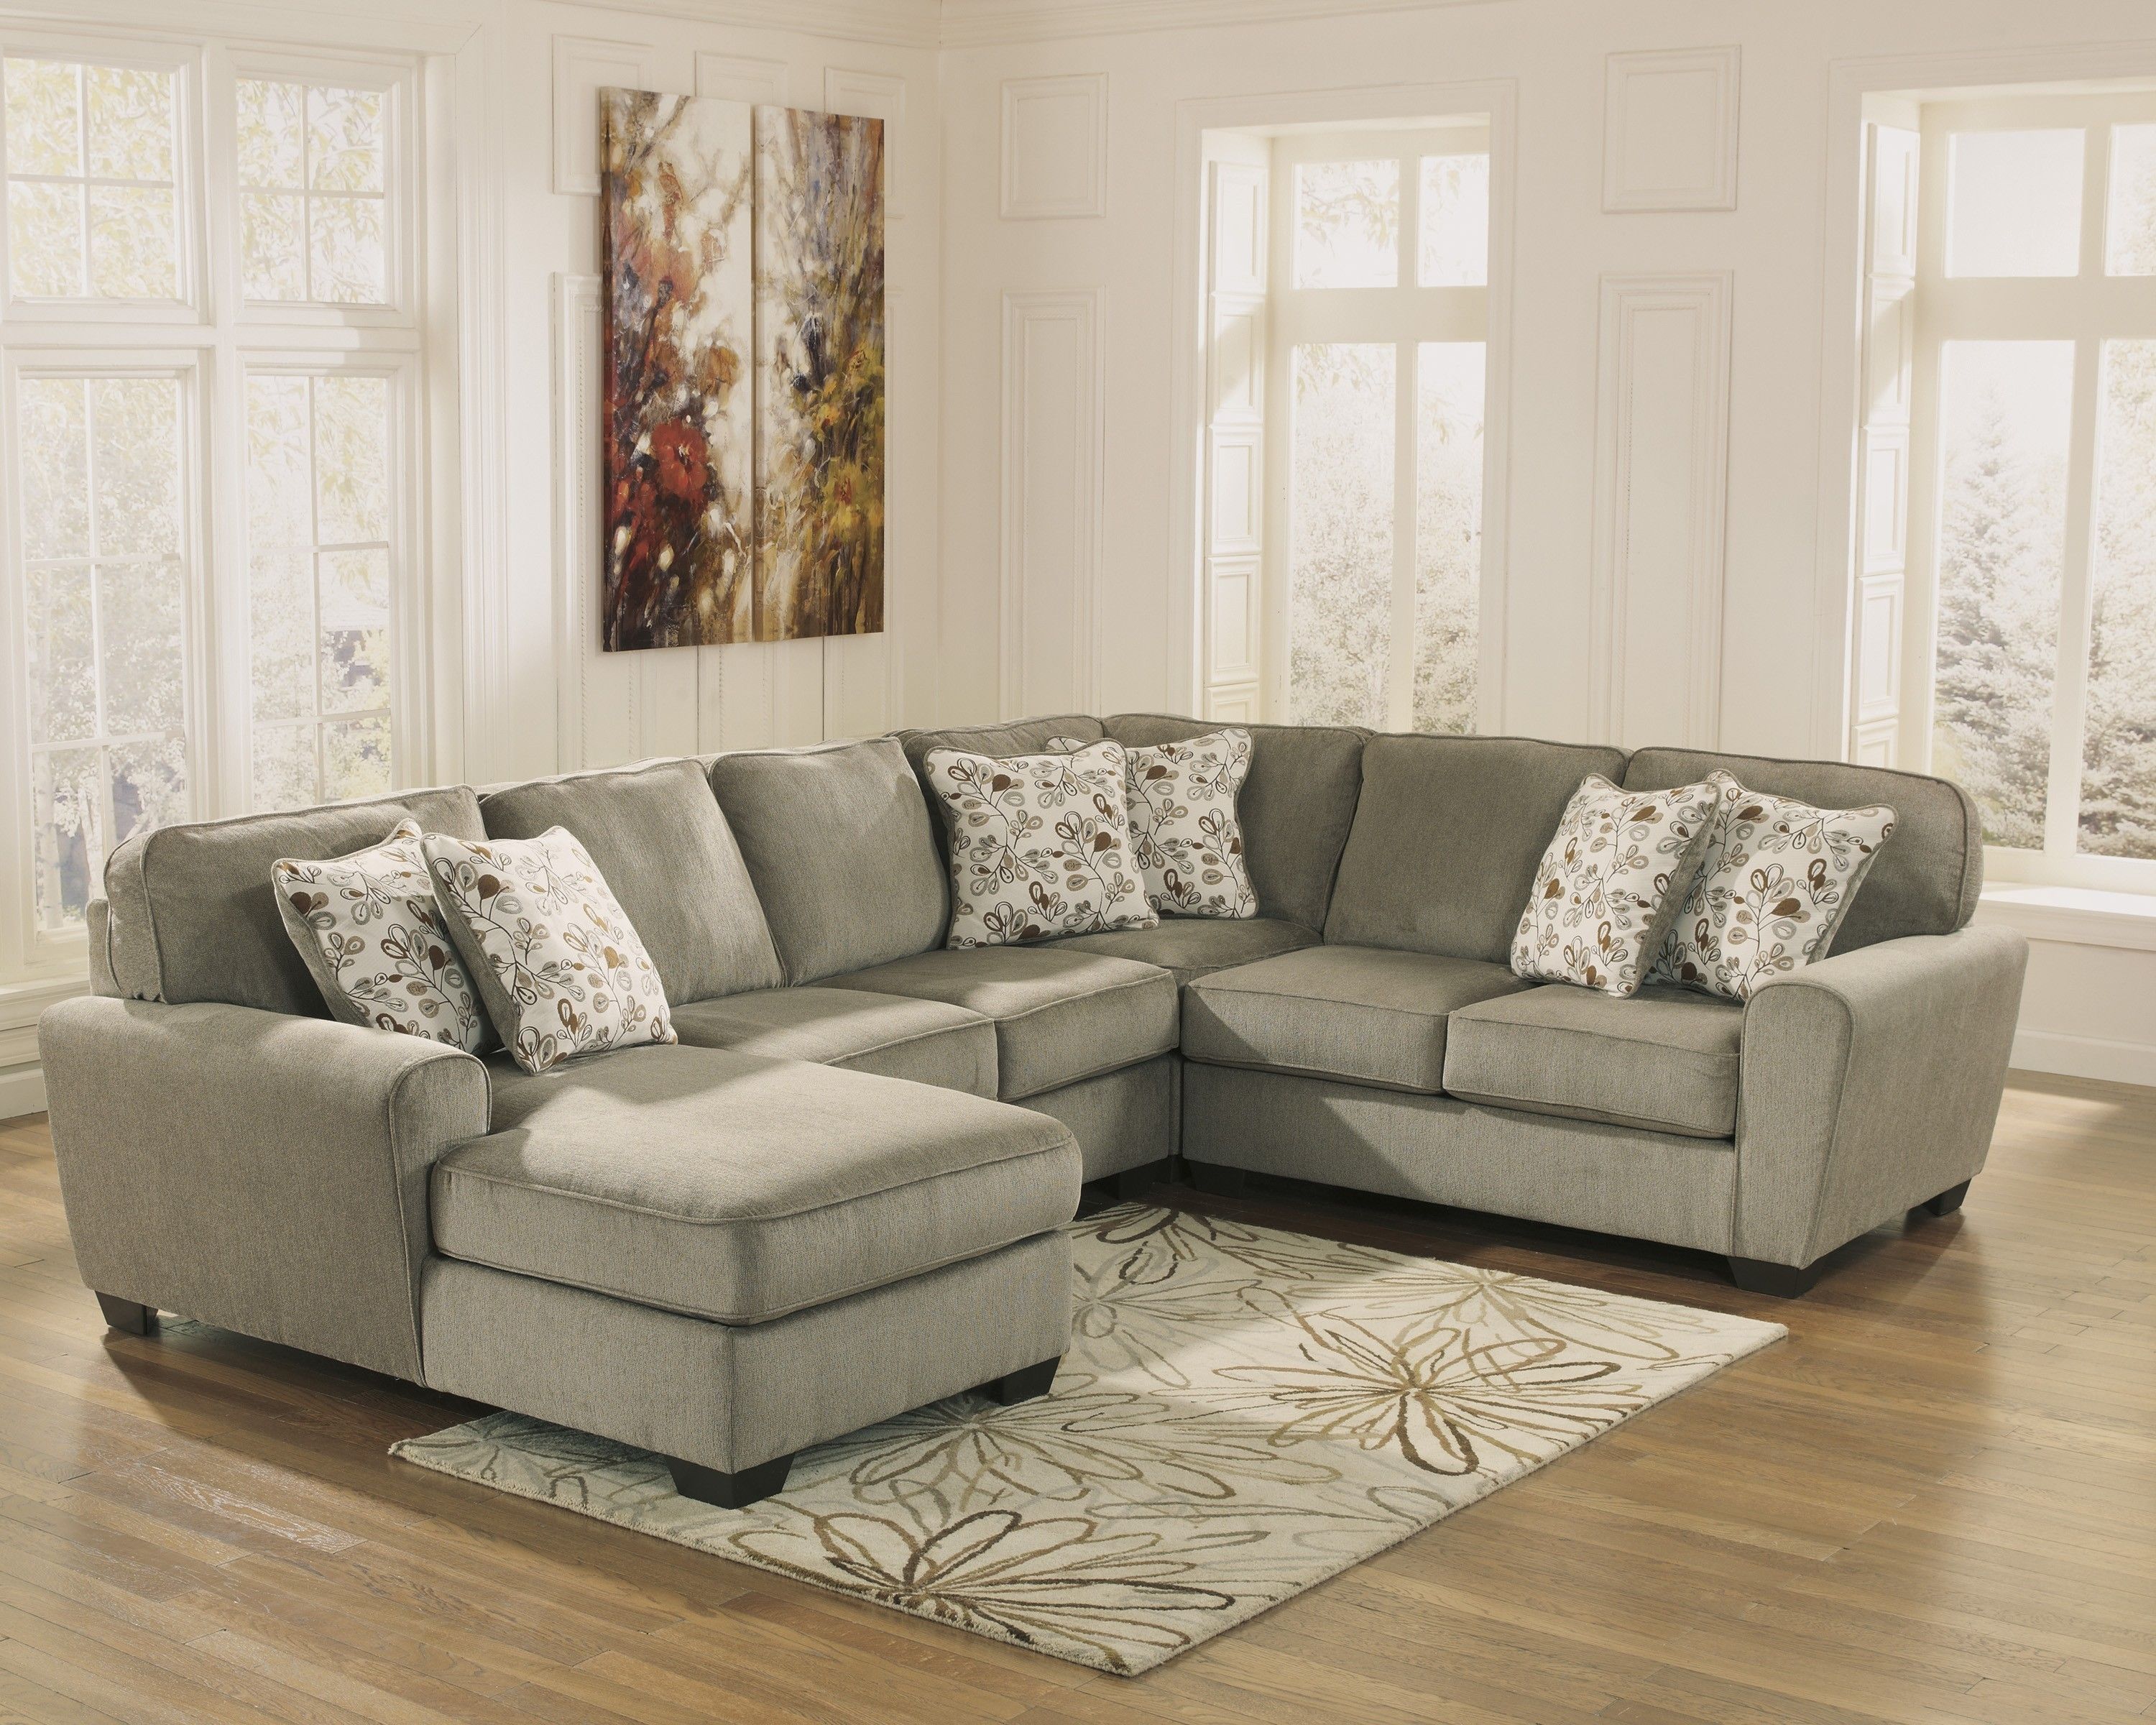 Patola Park Patina 4 Piece Sectional Set With Left Arm Facing Chaise Within Elk Grove Ca Sectional Sofas (View 8 of 10)